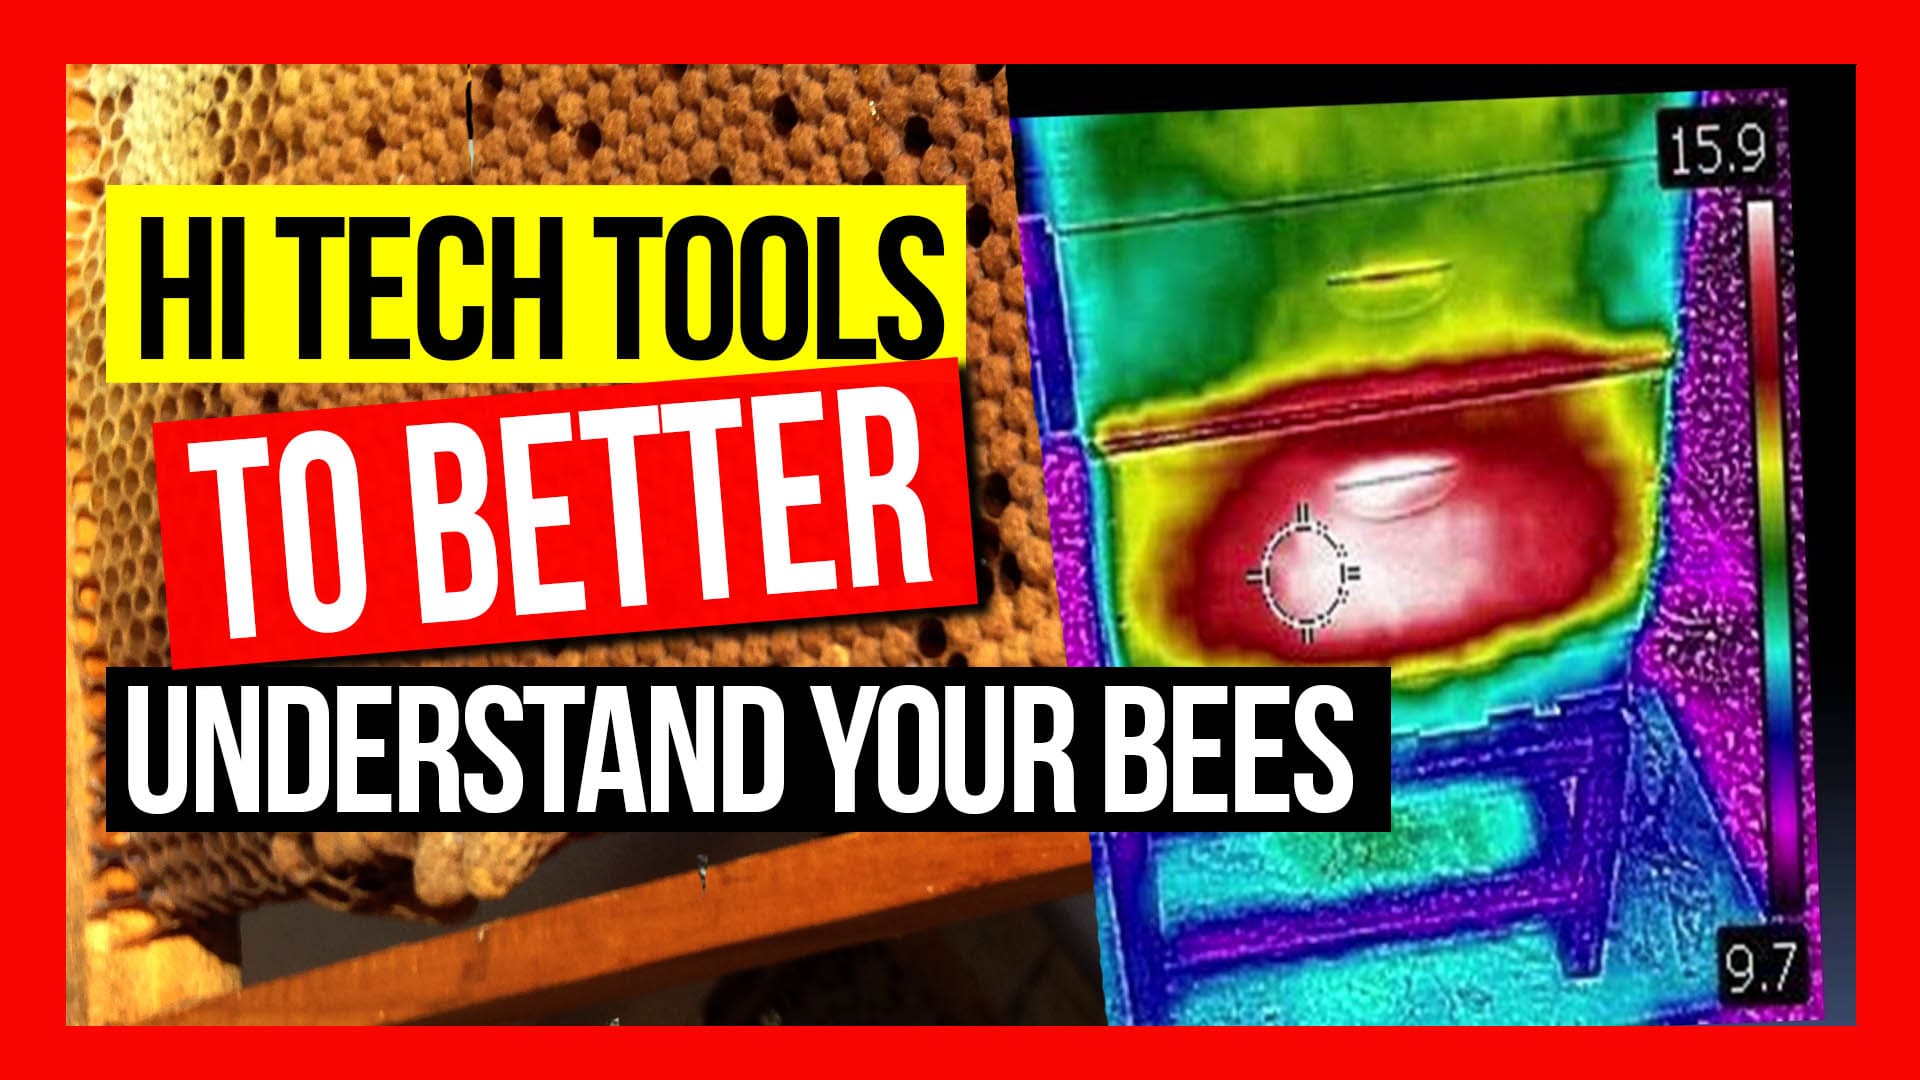 ABA-of-NSW-Field-Day-2019-Part-02-Hi-Tech-Tools-to-Better-Understand-your-Bees-ft-Michael-Syme-thumbnail-min